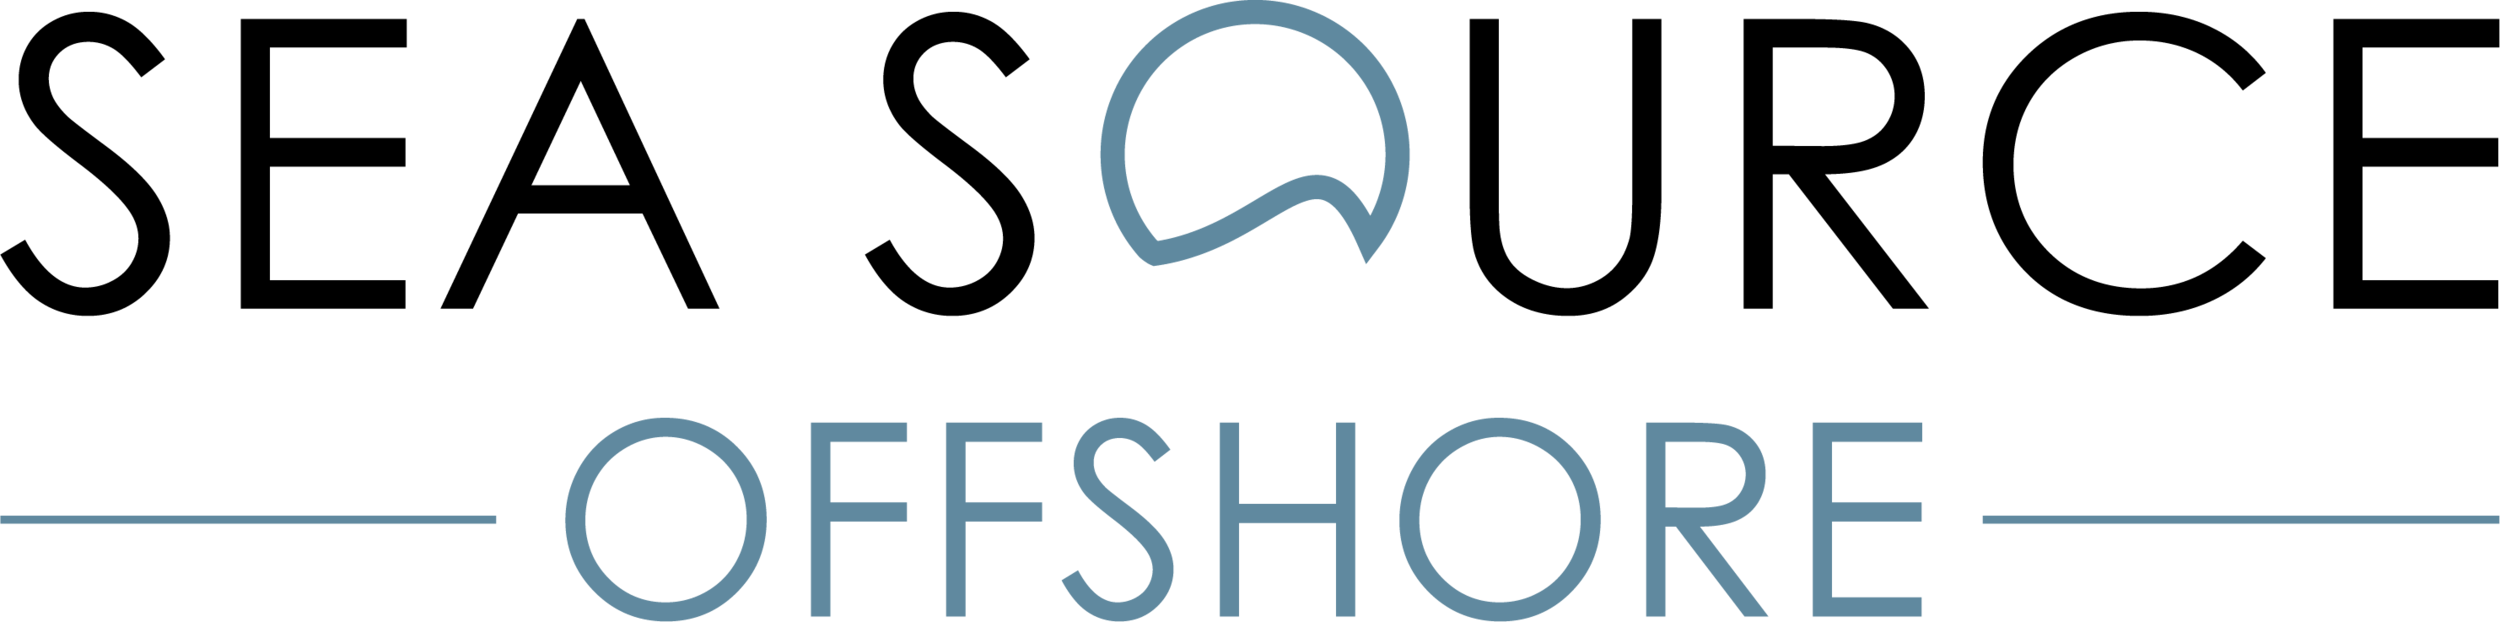 Logo Sea Source Offshore.png